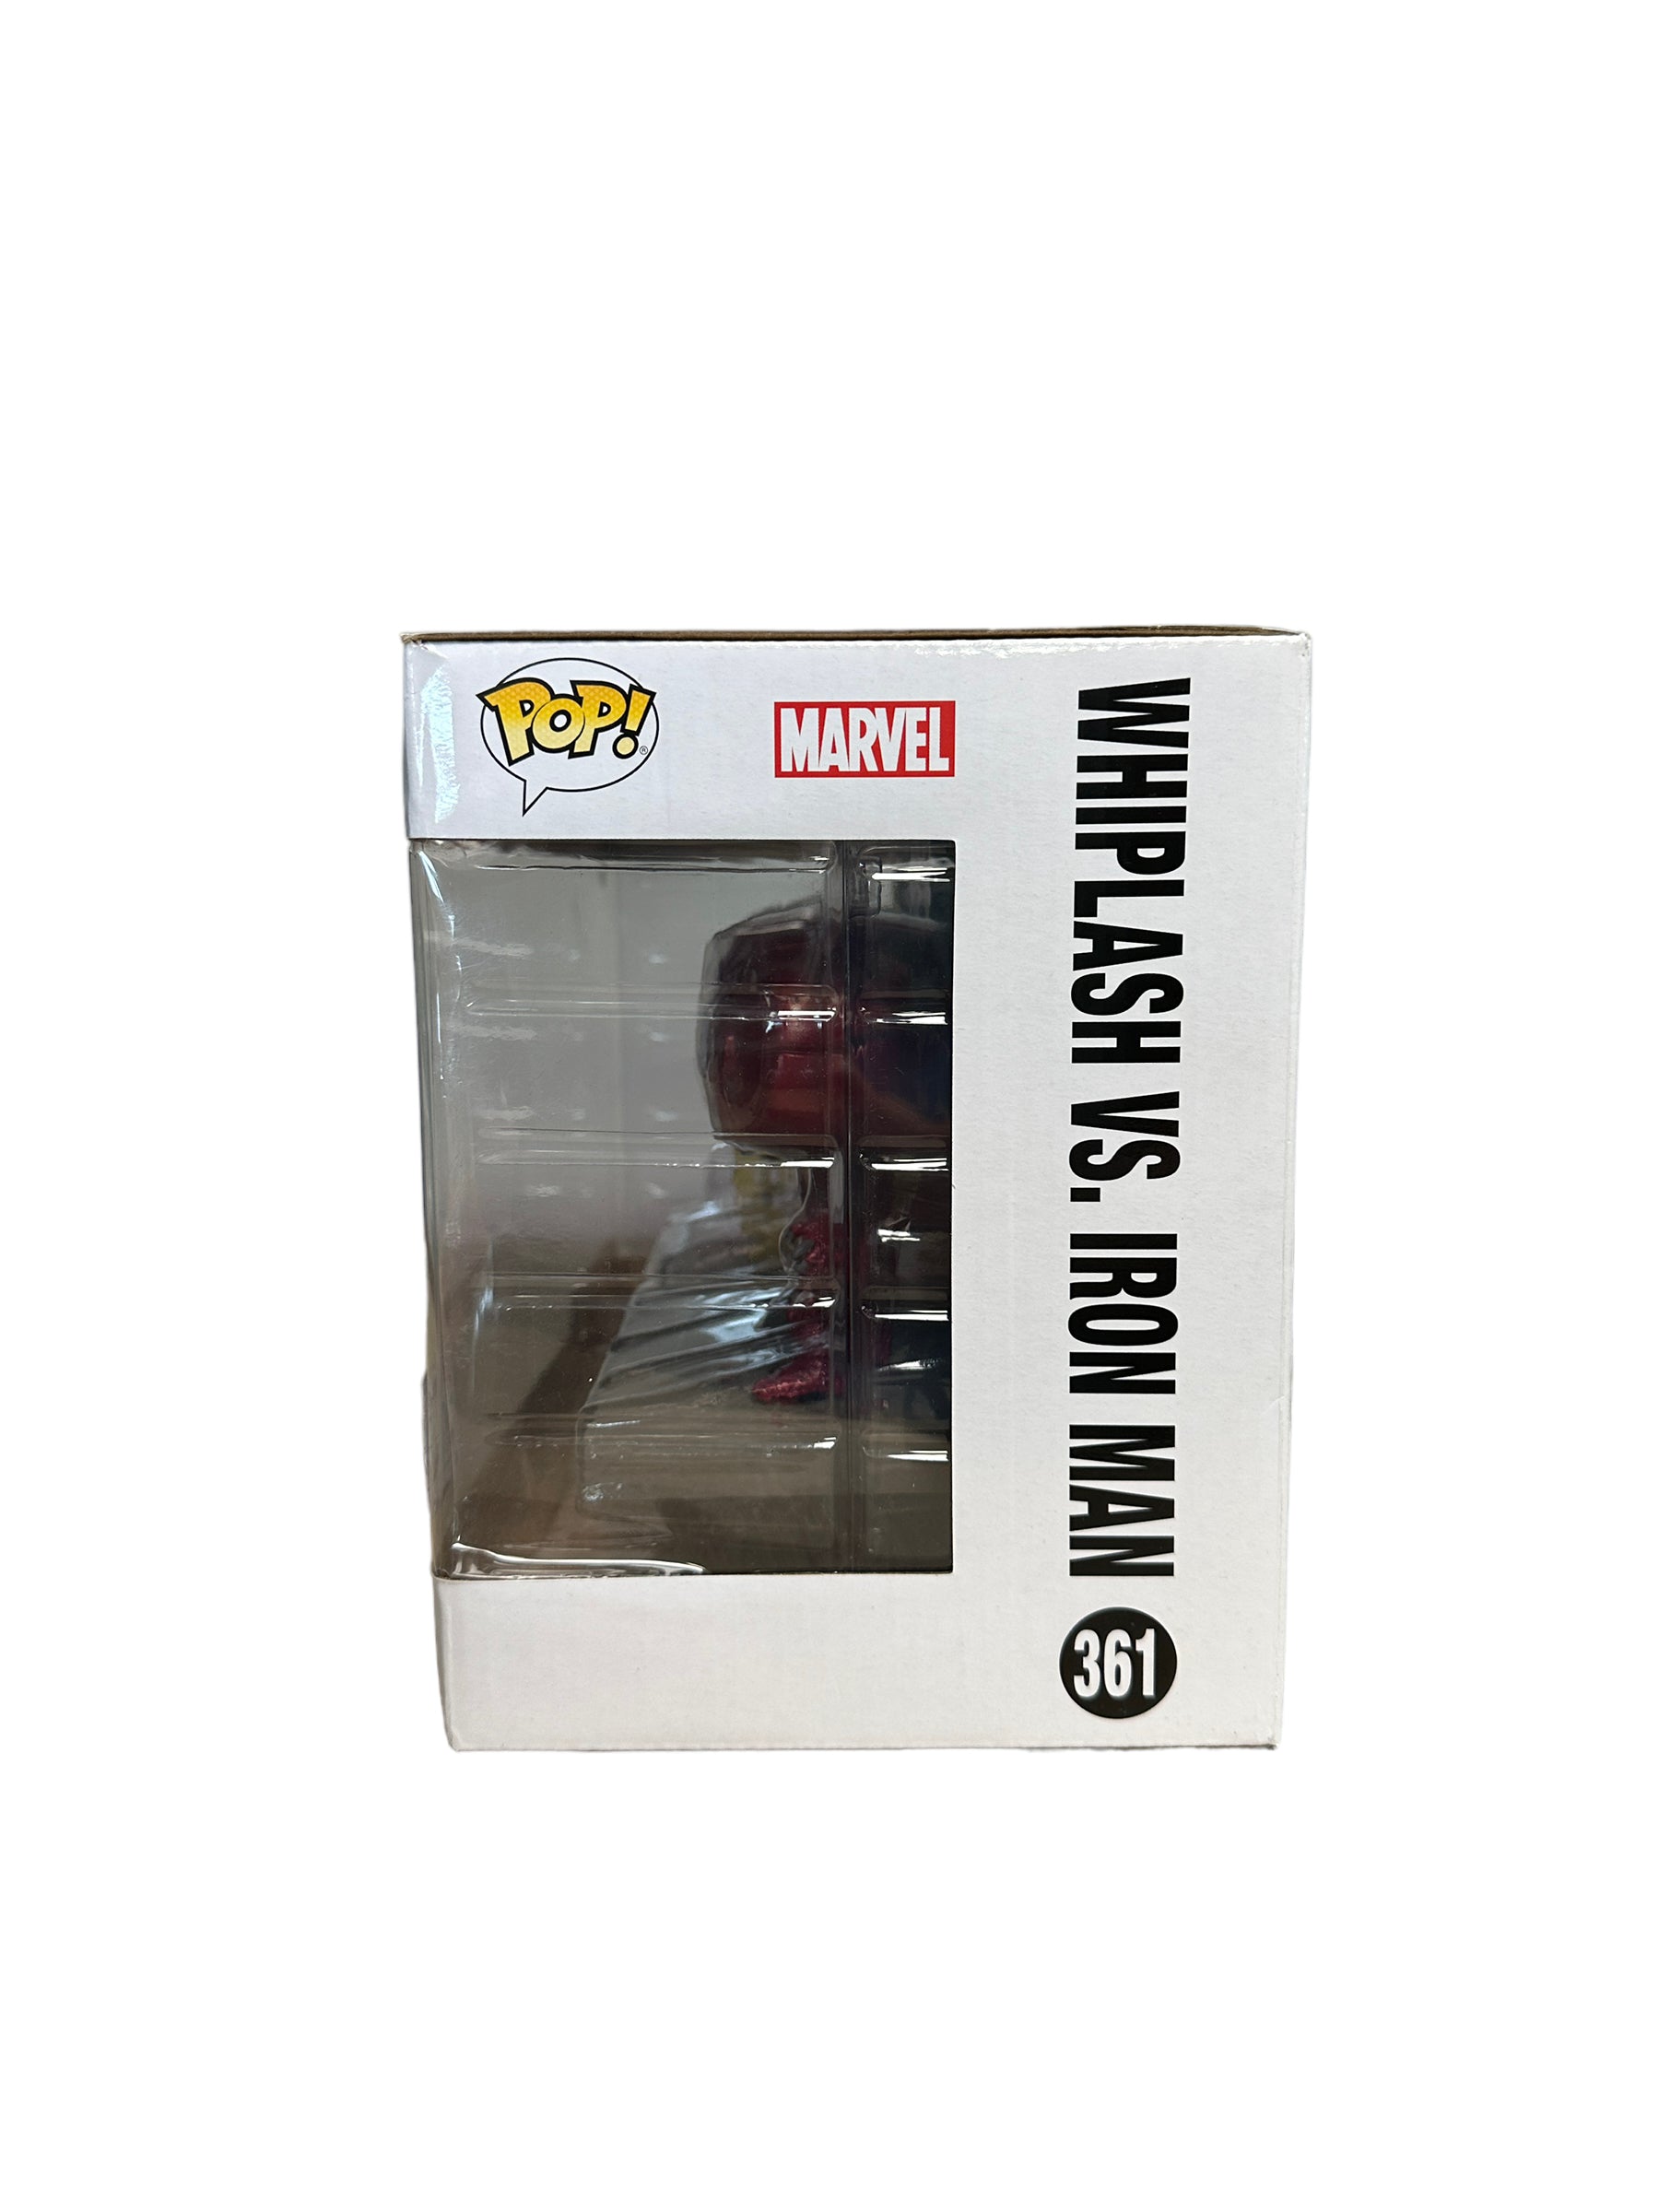 Whiplash Vs. Iron Man #361 Funko Pop Movie Moments! - Marvel Studios First Ten Years - Marvel Collector Corps Exclusive - Condition 7.5/10